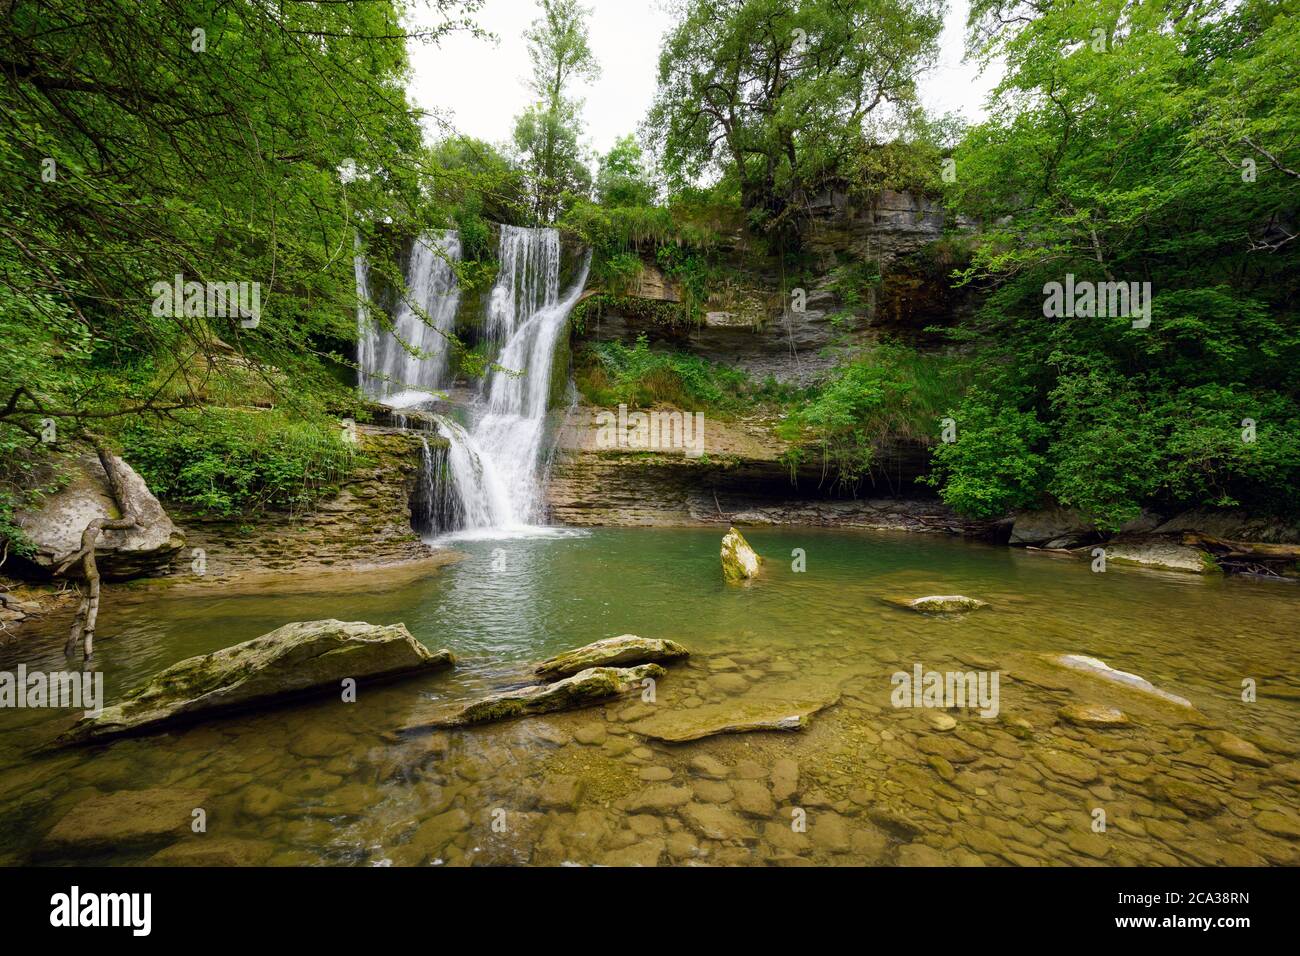 Idyllic rain forest waterfall, stream flowing in the lush green forest. High quality image. Stock Photo